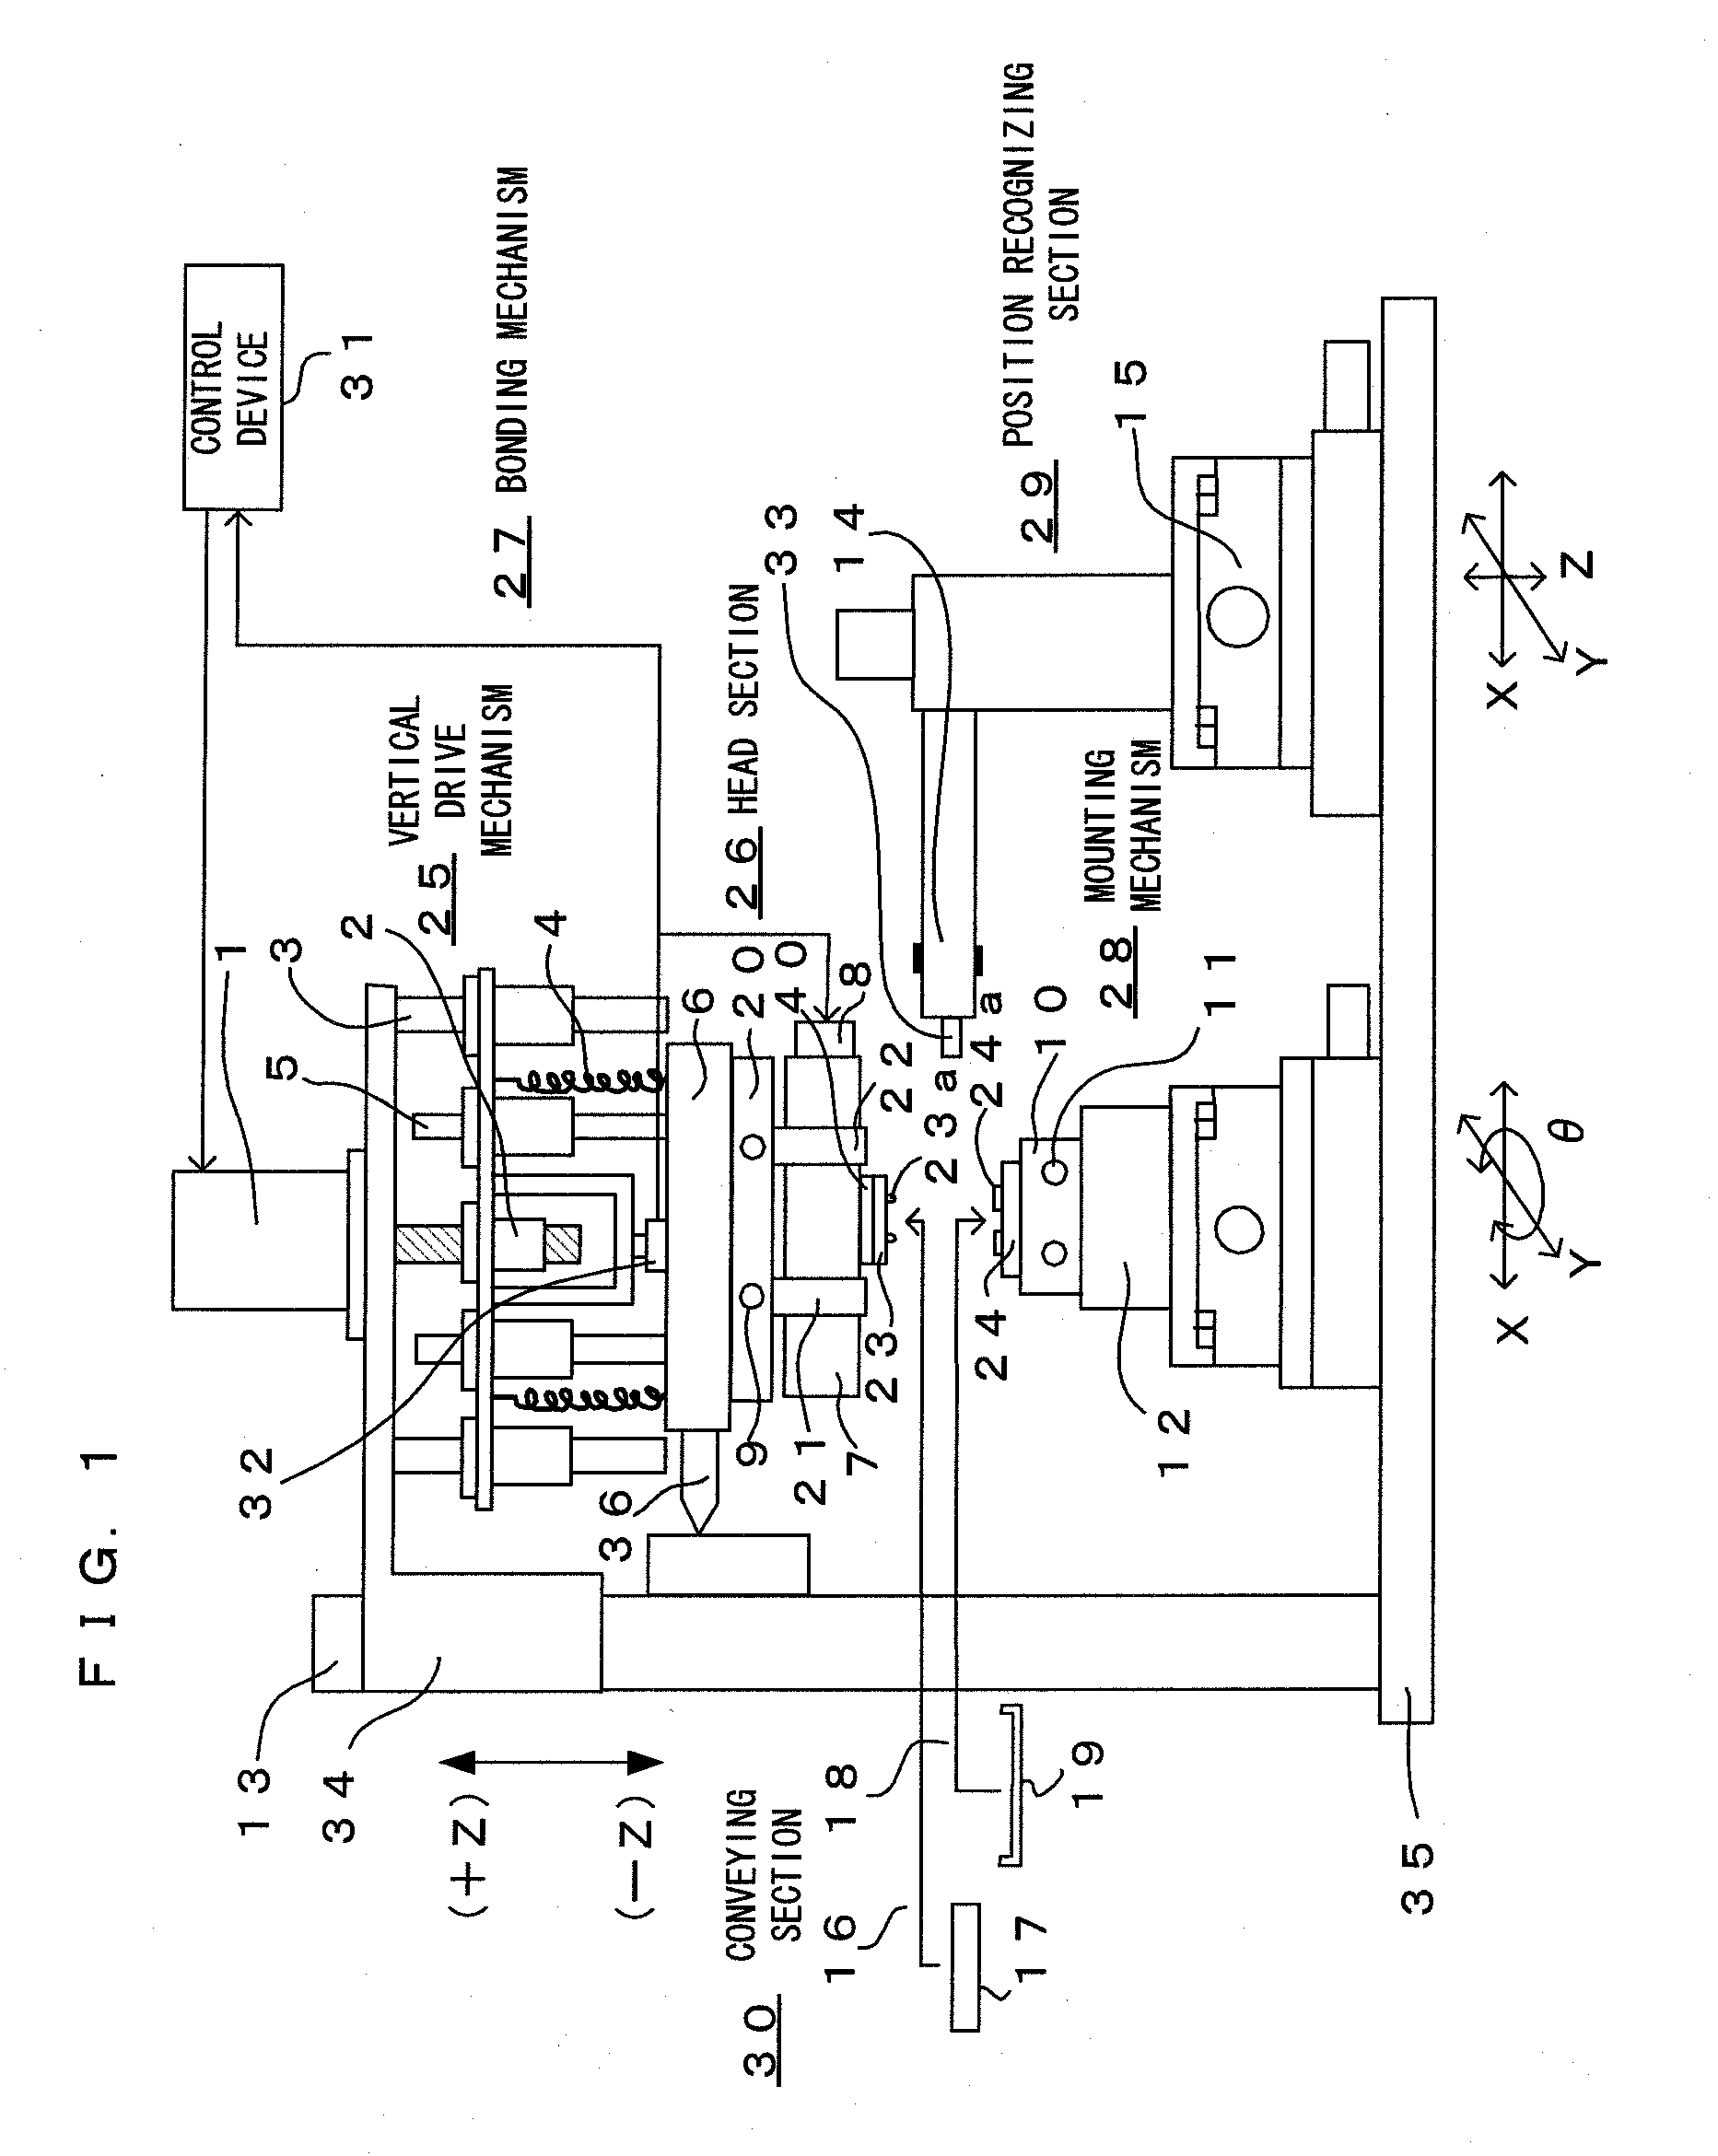 Support device for resonator